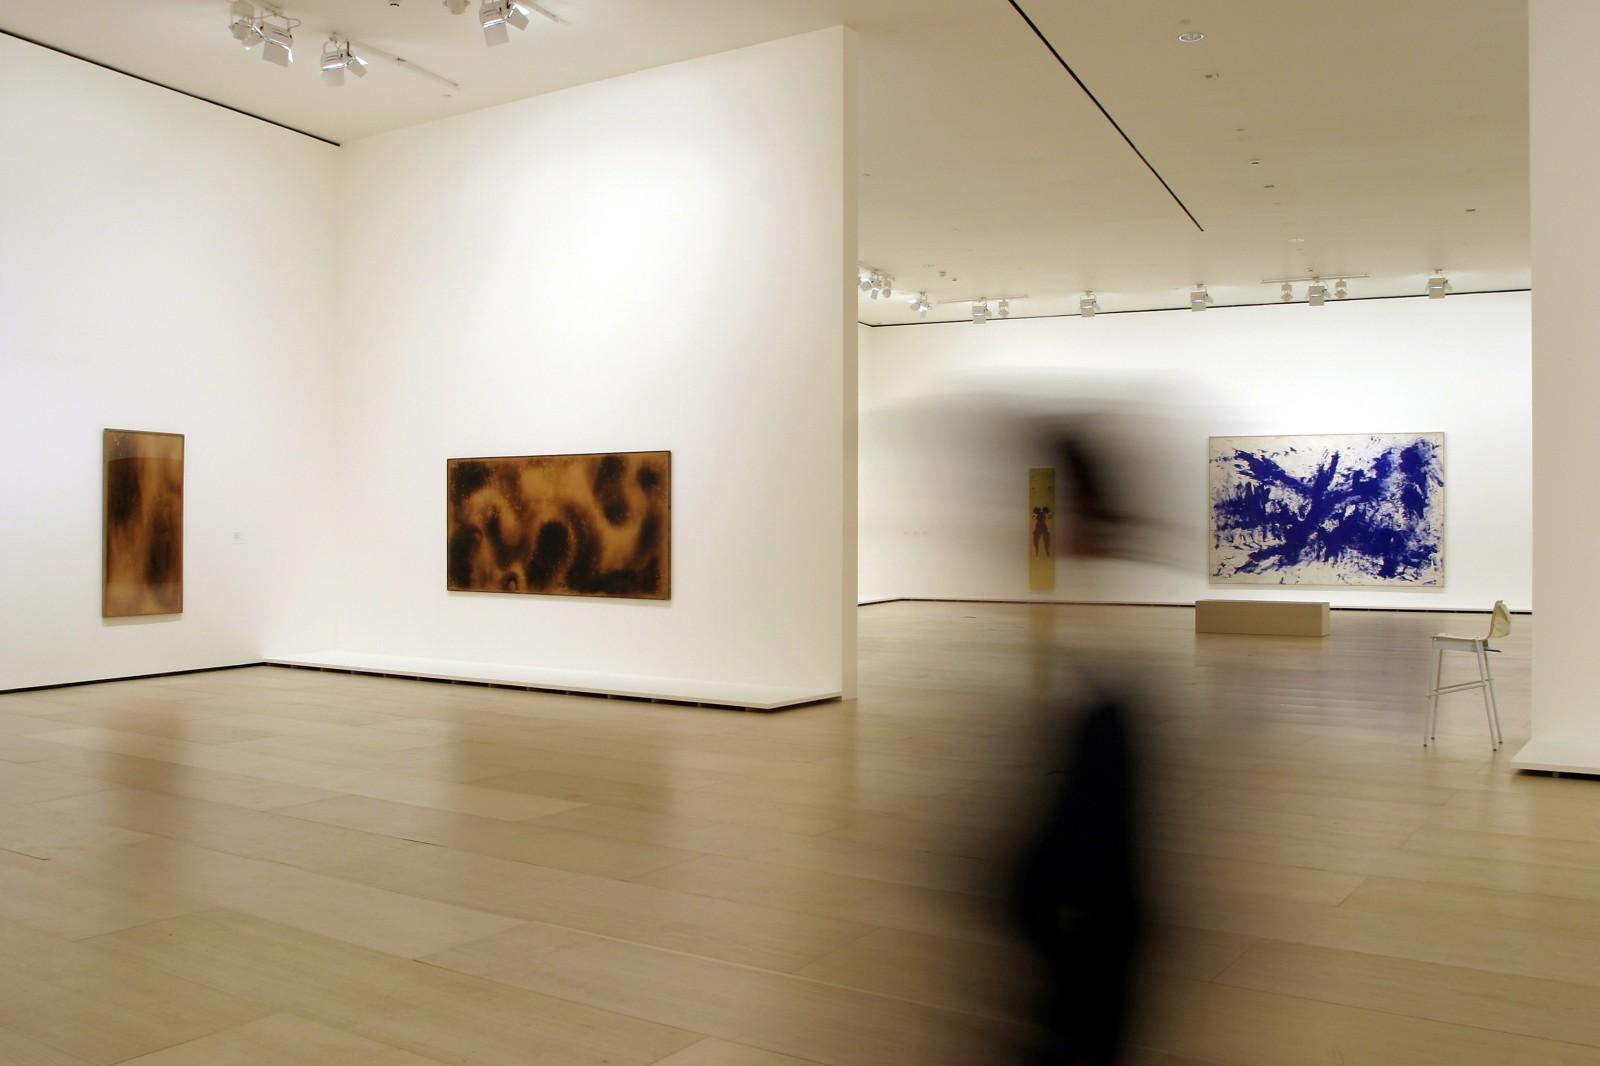 View of the exhibition "Yves Klein", Guggenheim Museum Bilbao, 2005